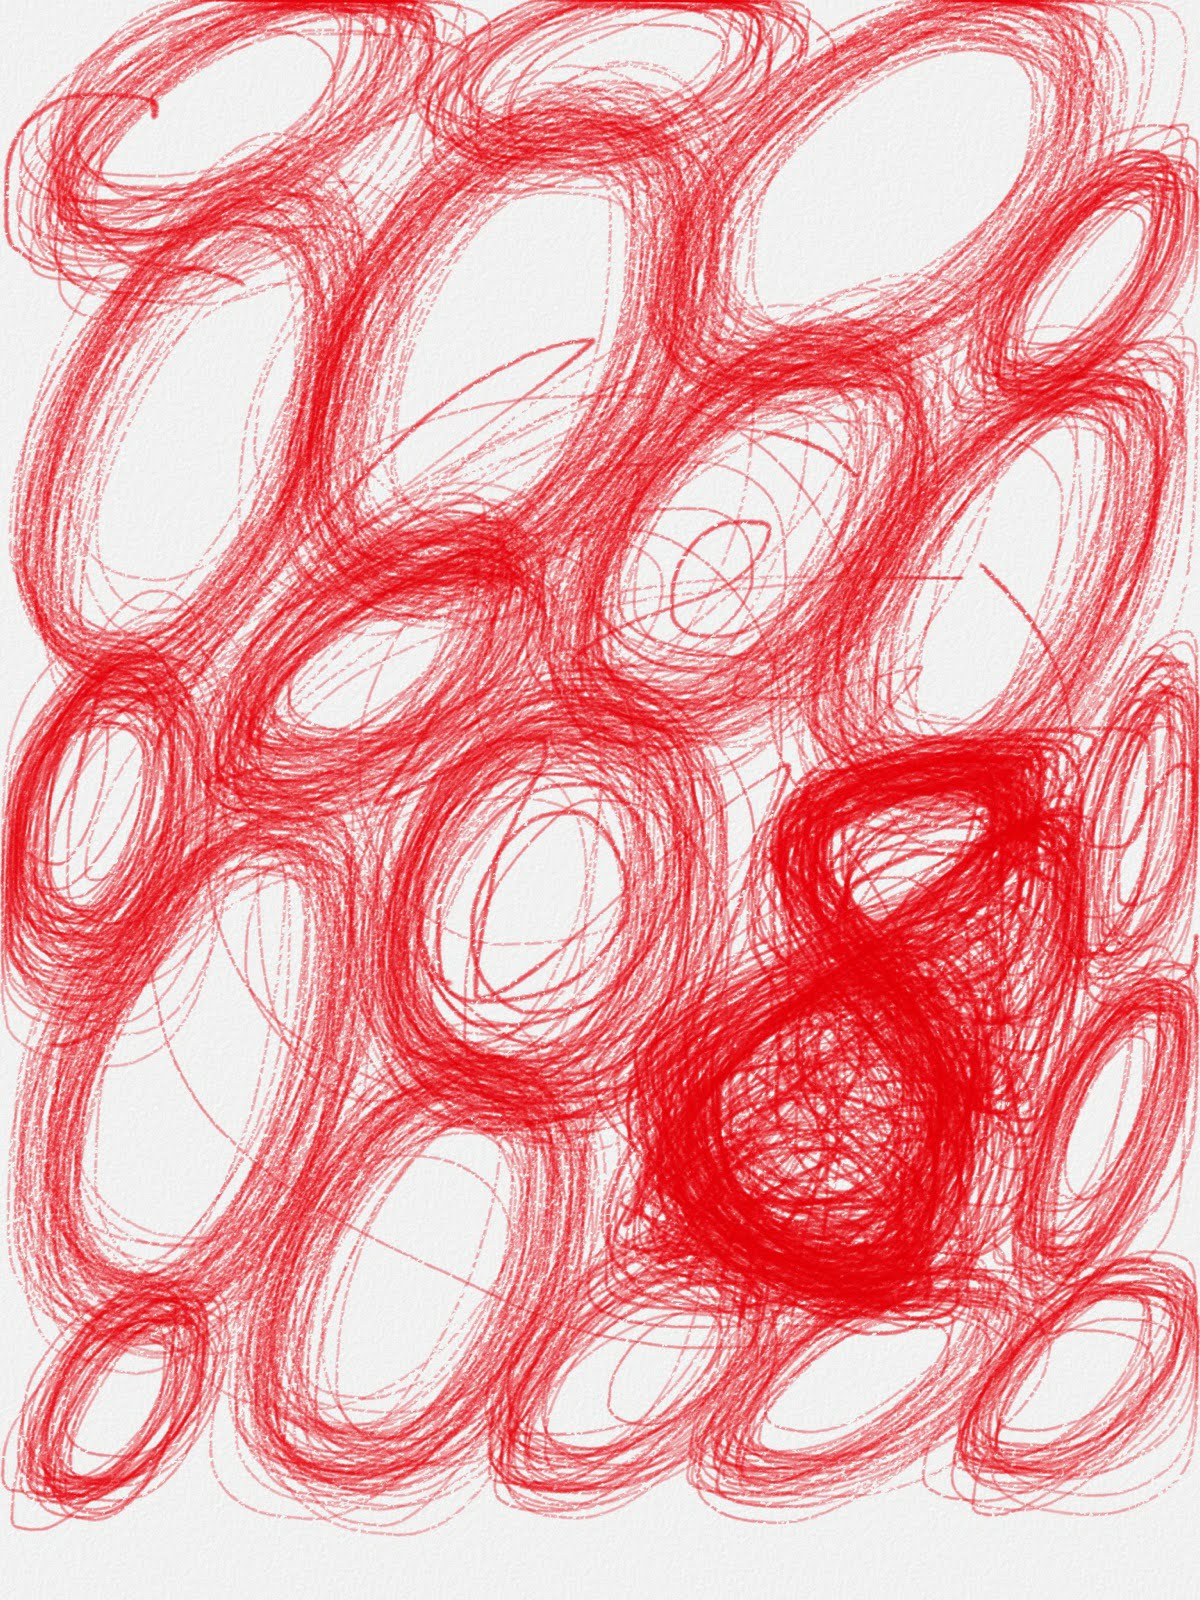 Dozens of red circles scribbled on a white background